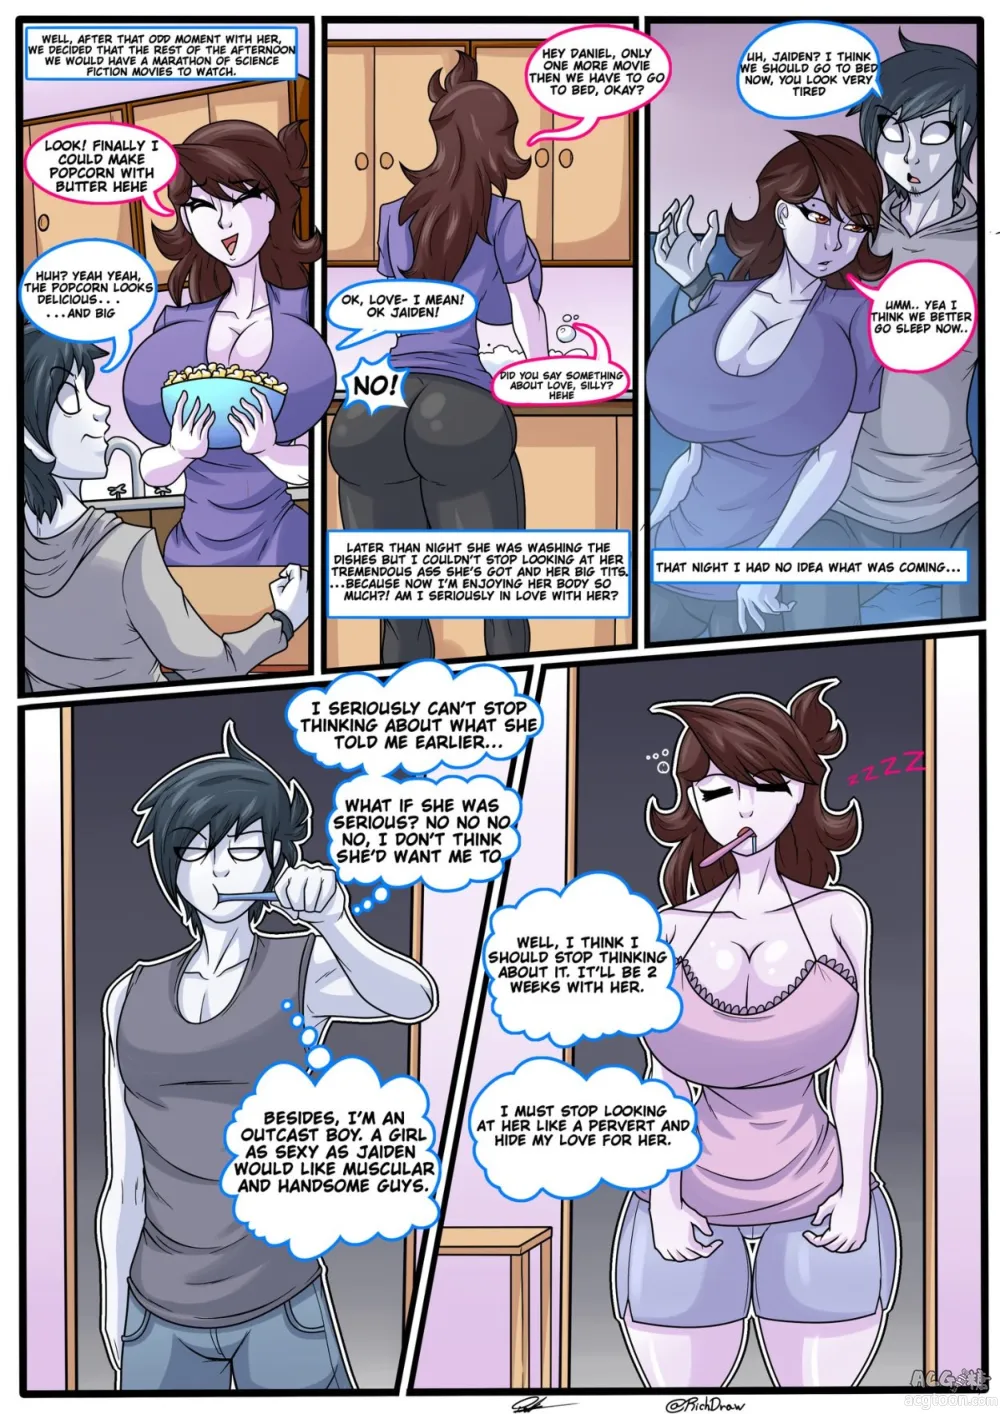 Caring For My Best Friend - Page 5